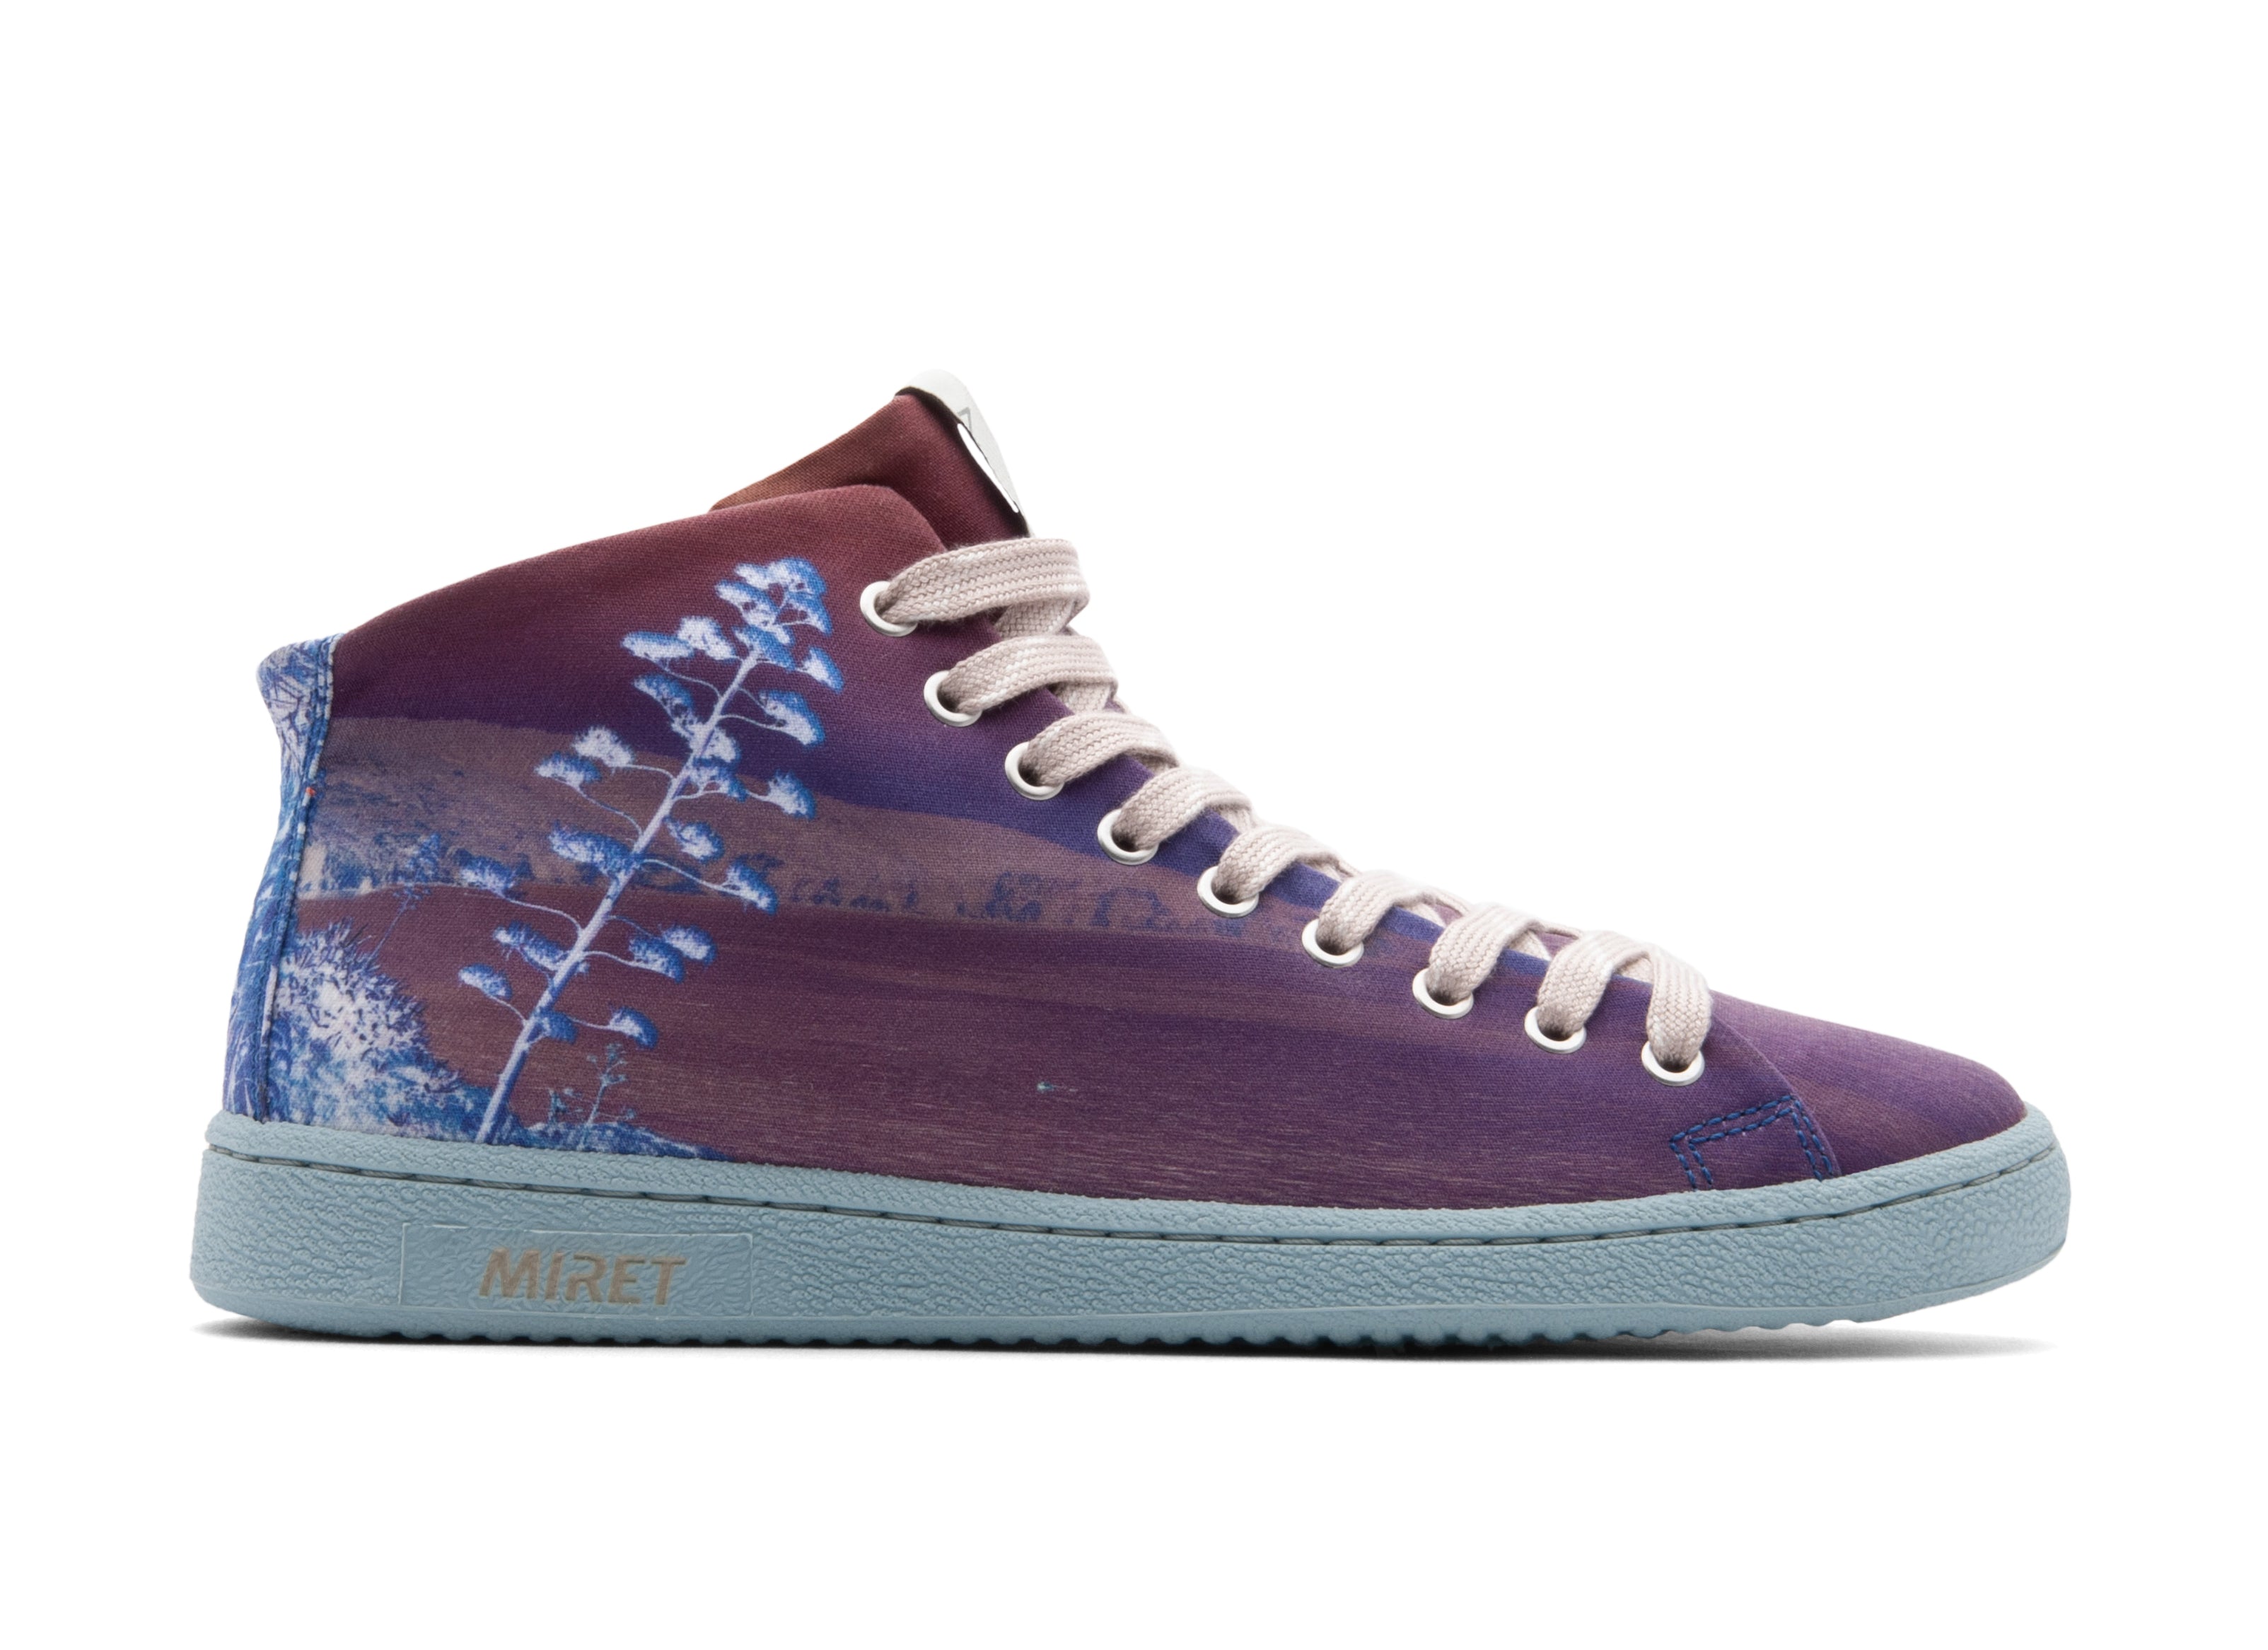 This mid-top sneaker comes with a certified-compostable canvas upper featuring a print of the Croatian island of Vis and a super flexible natural rubber outsole.